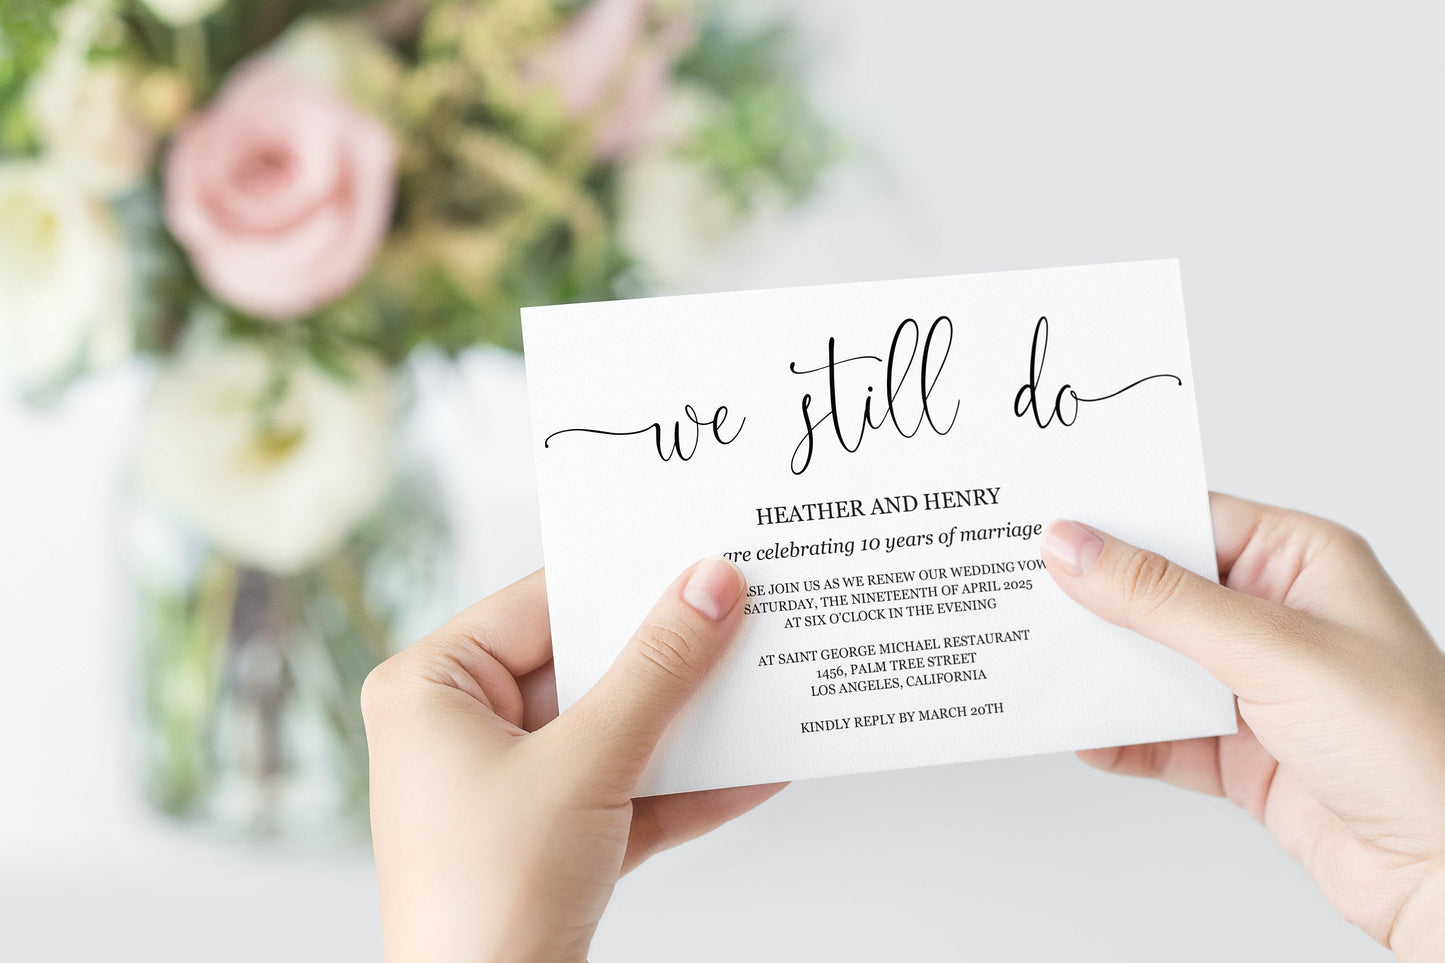 We Still Do Invitation Template, Wedding Anniversary, Vow Renewal Invite, Anniversary Party, Renew Vows - Heather  SAVVY PAPER CO